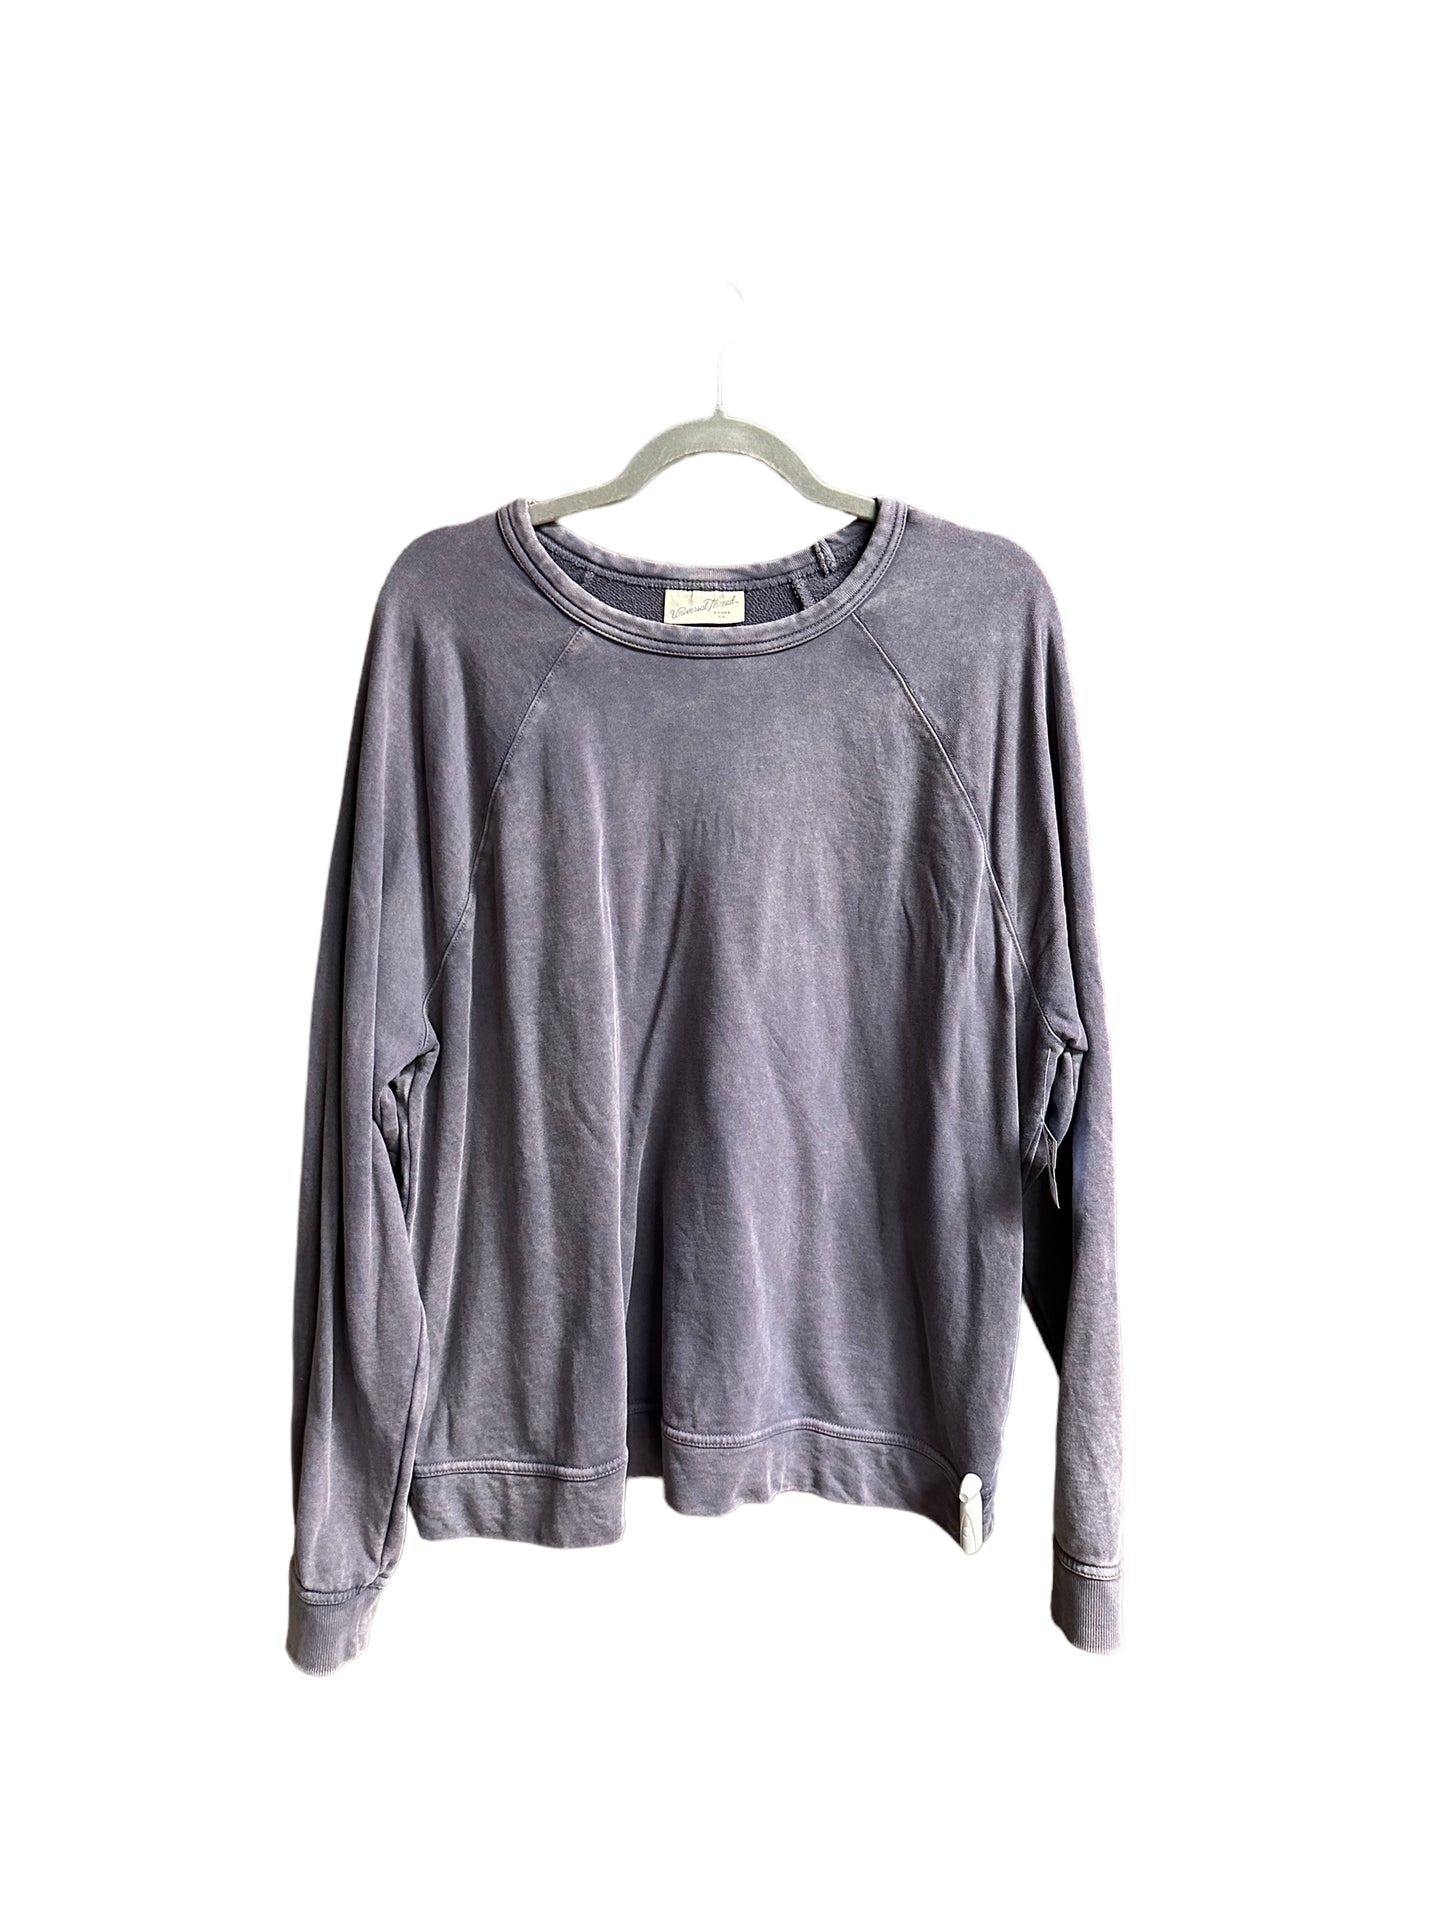 Top Long Sleeve By Universal Thread  Size: 2x